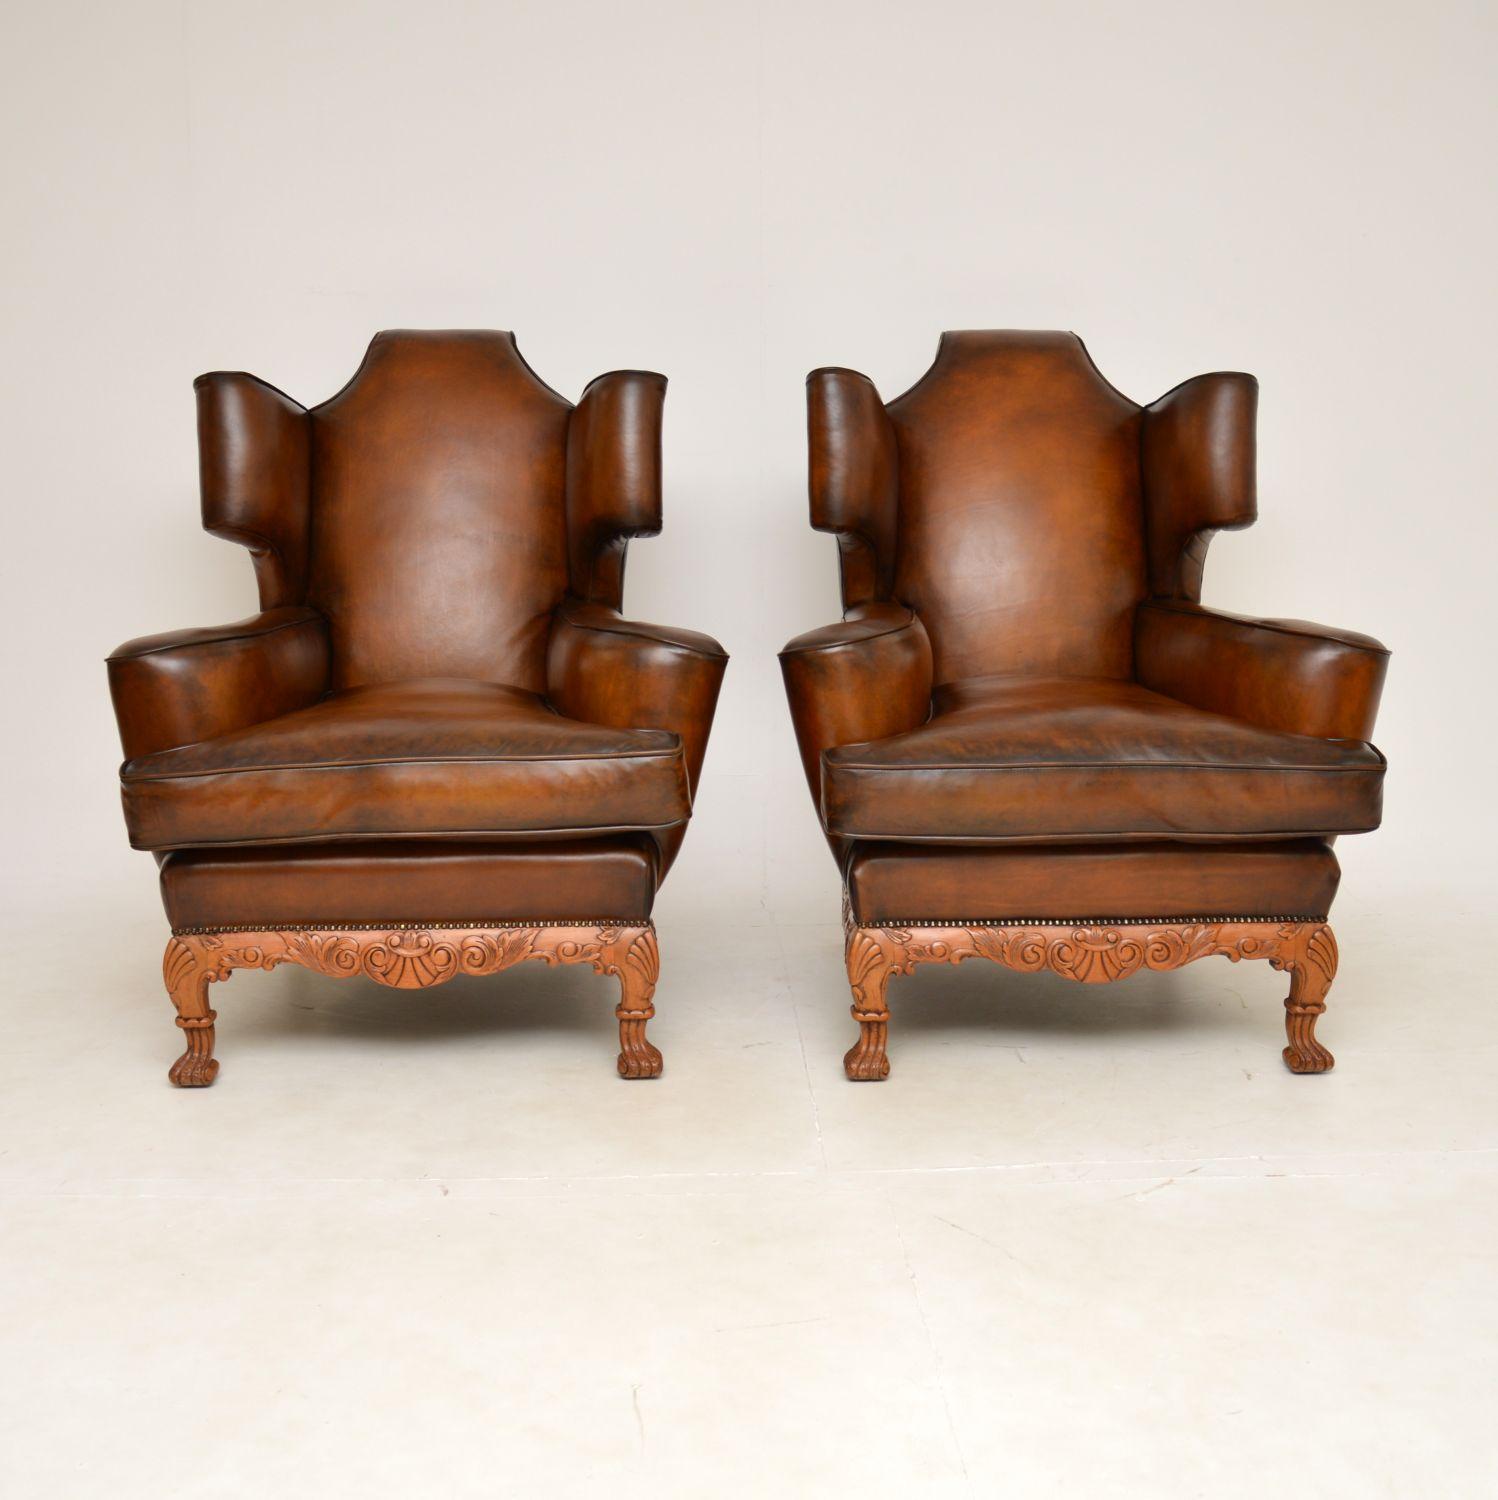 A magnificent pair of antique leather wing back armchairs, possibly the finest pair we have come across. They were made in England, and they date from around the 1920’s.

They are of very impressive large proportions, the quality is absolutely